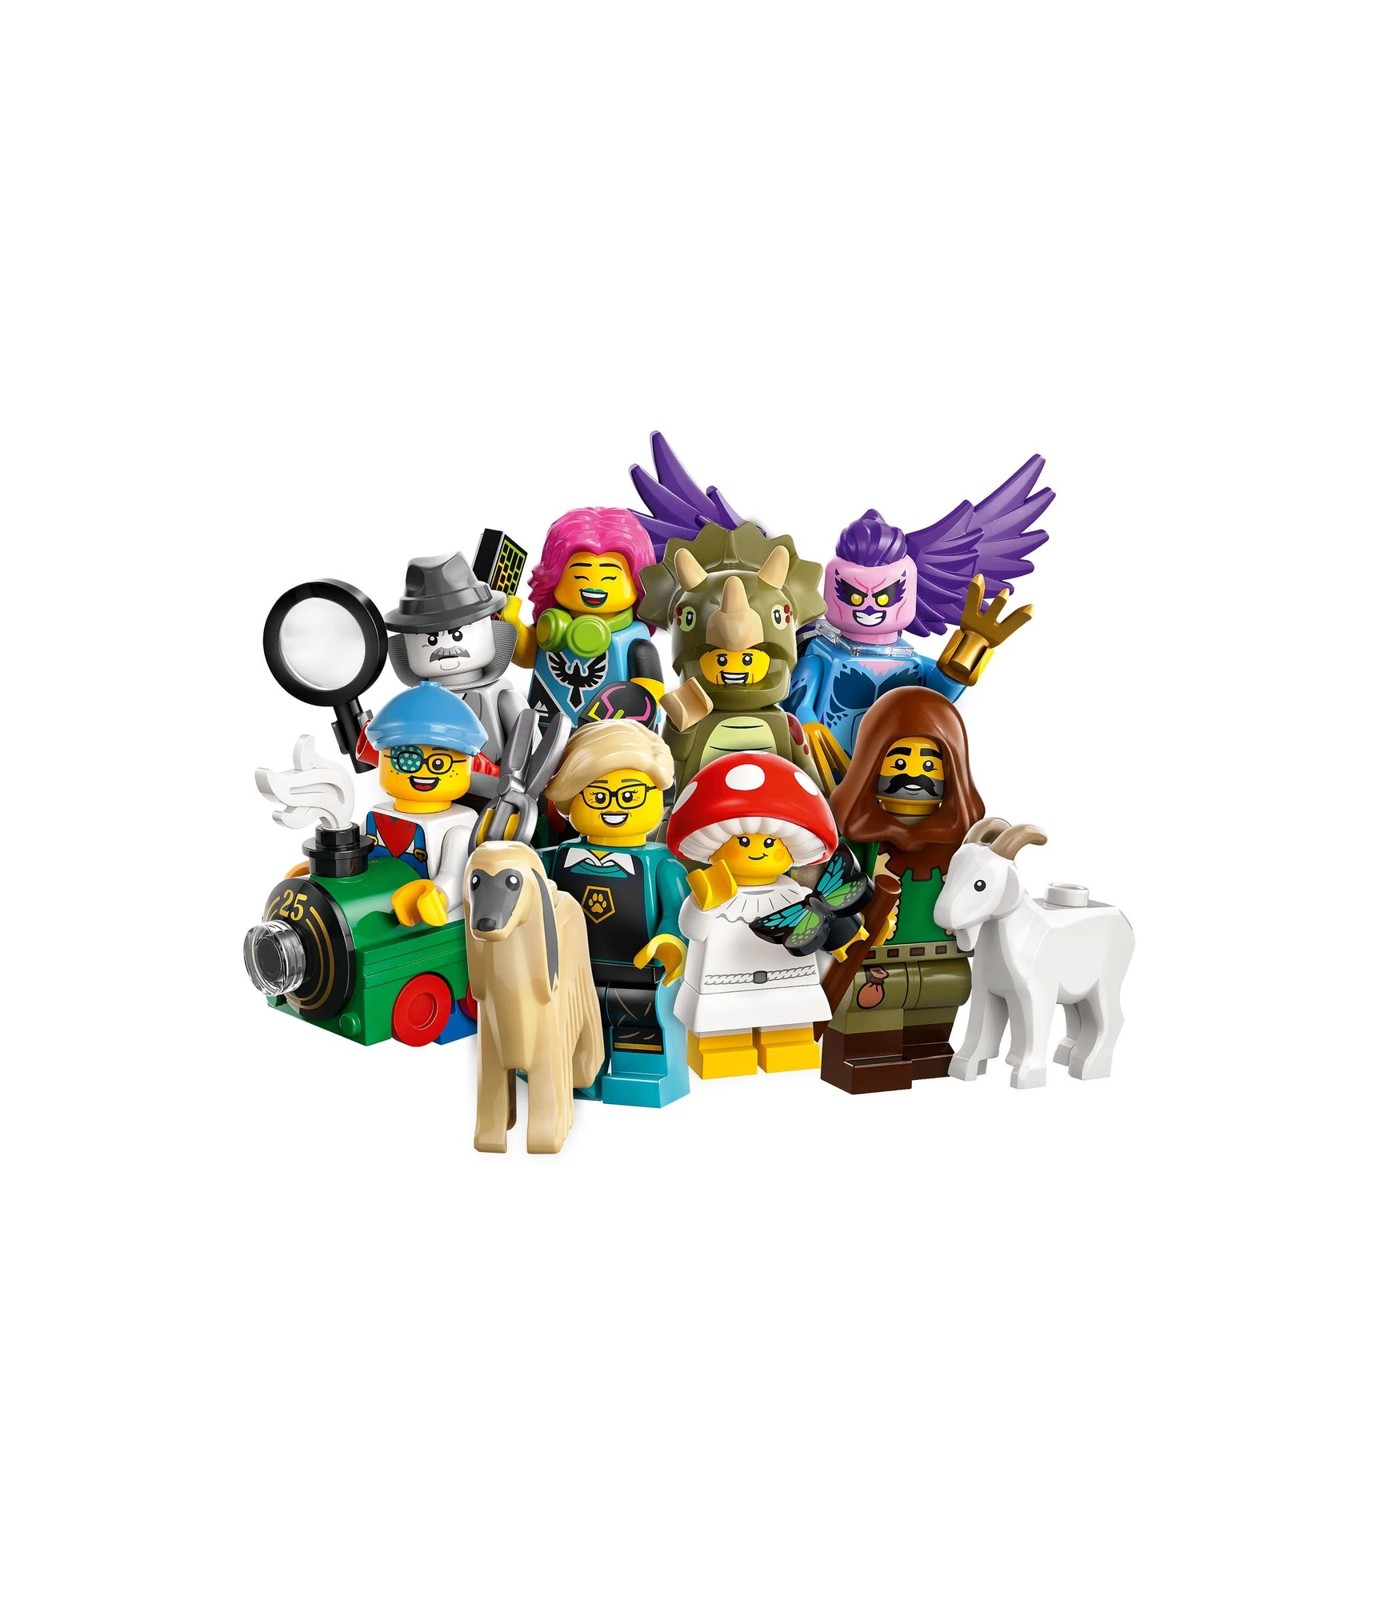 LEGO 71045 Complete Set of 12 MINIFIGURES Series 25 - IN HAND